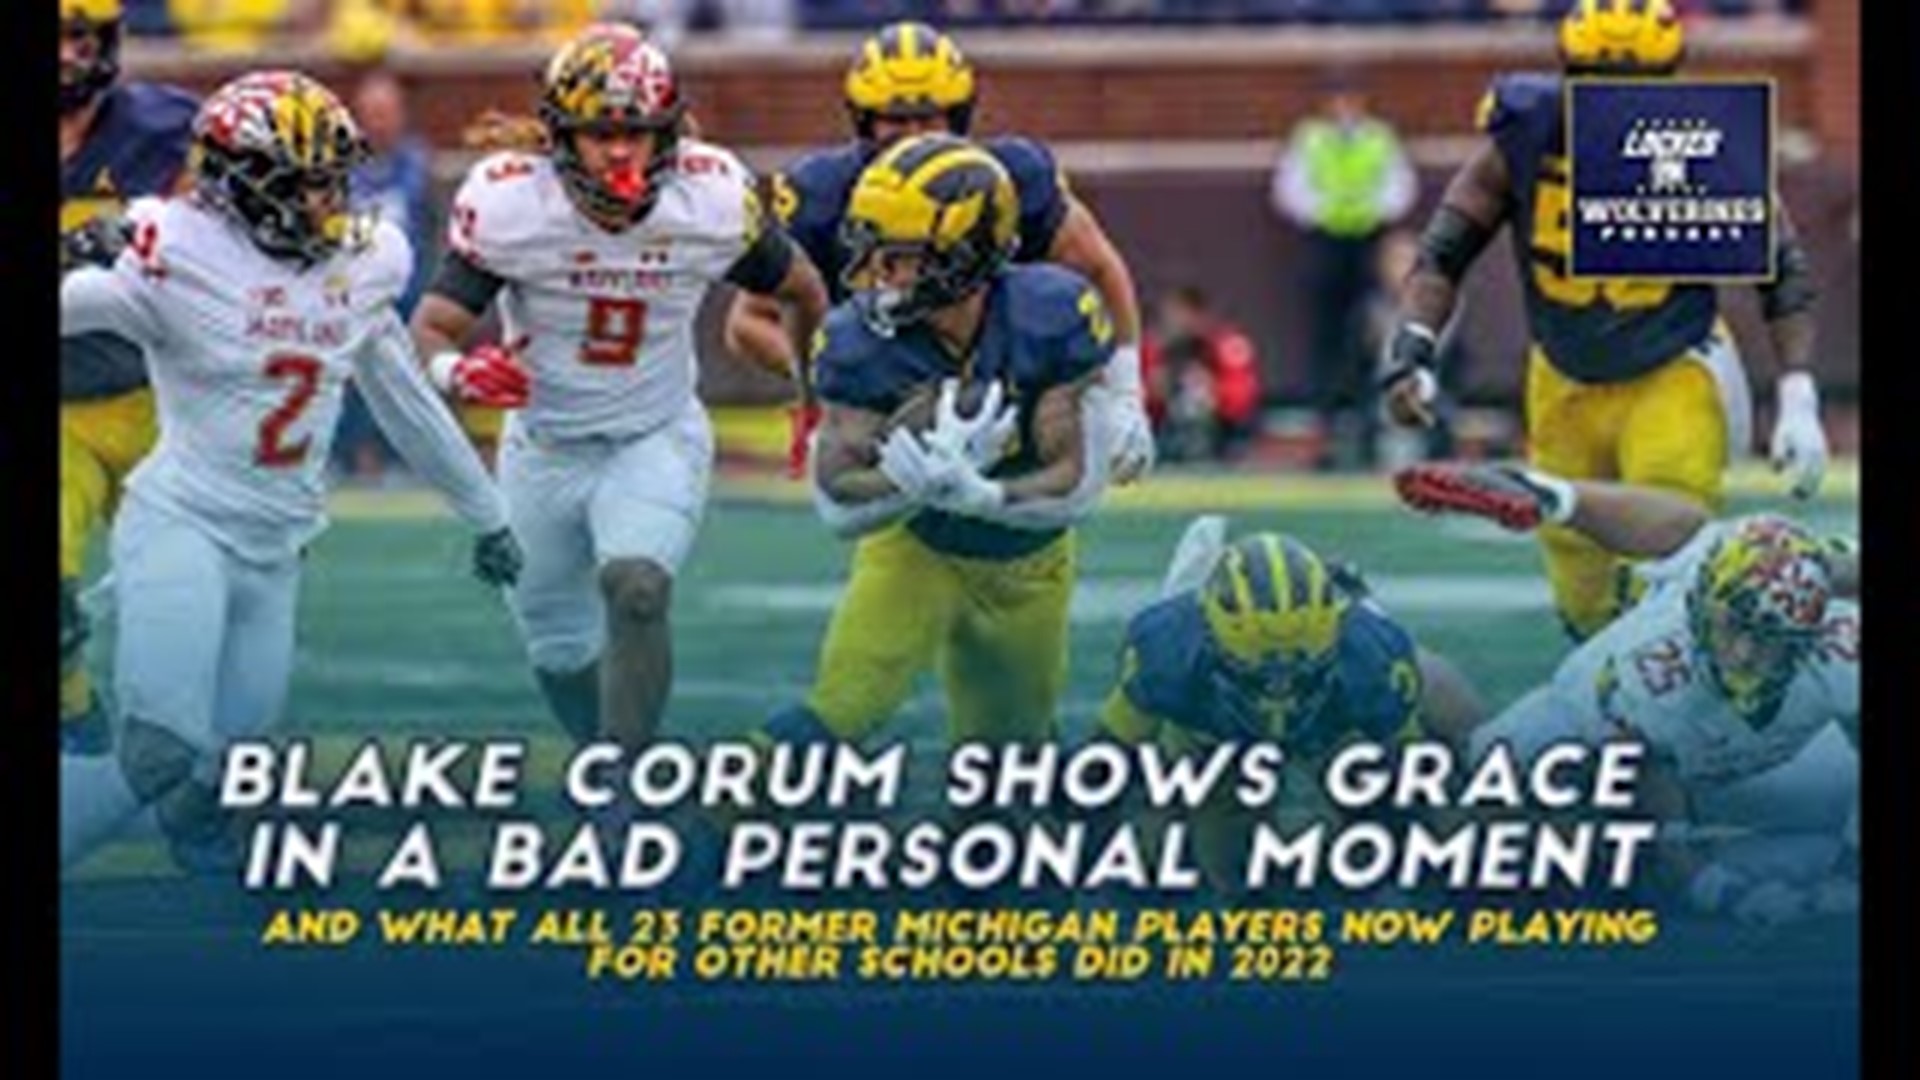 Blake Corum's signature car was stolen, yet he's handling it well. Plus a look at what all 23 former Michigan football players did at the schools they transferred to